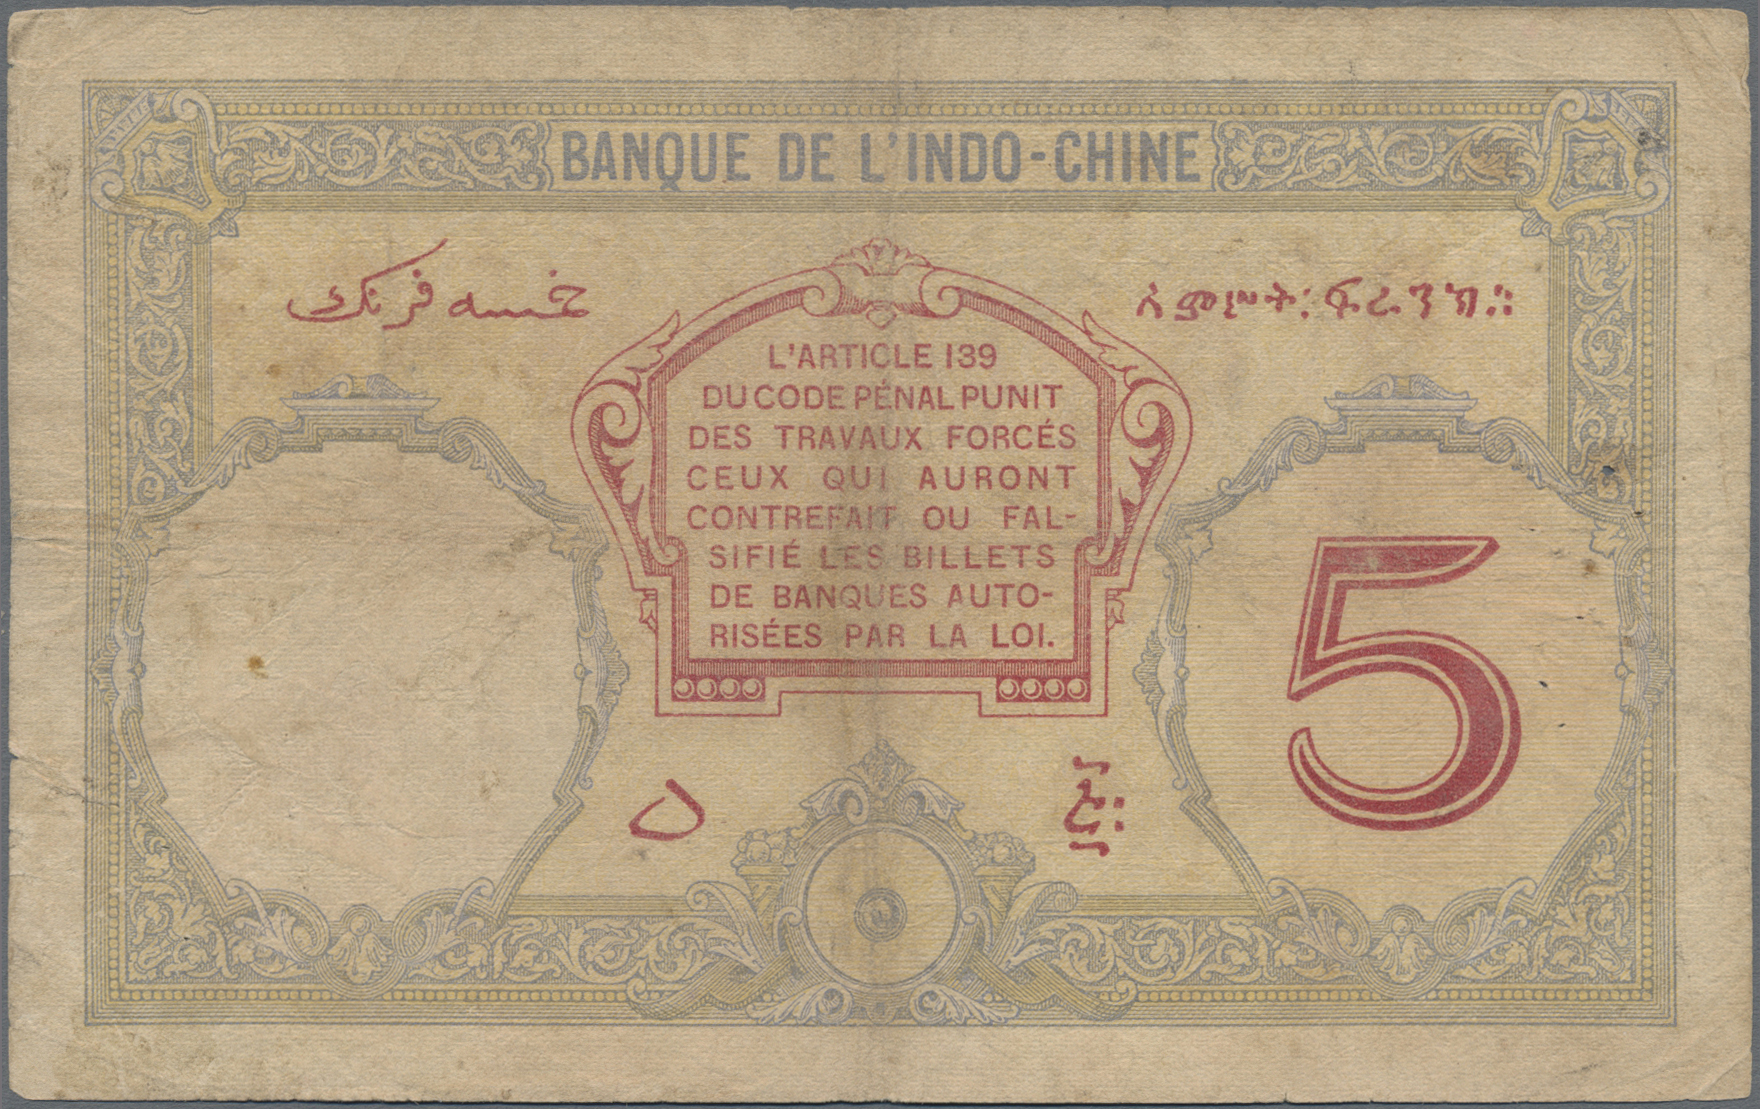 Lot 00095 - Djibouti / Dschibuti | Banknoten  -  Auktionshaus Christoph Gärtner GmbH & Co. KG 54th AUCTION - Day 1 Coins & Banknotes